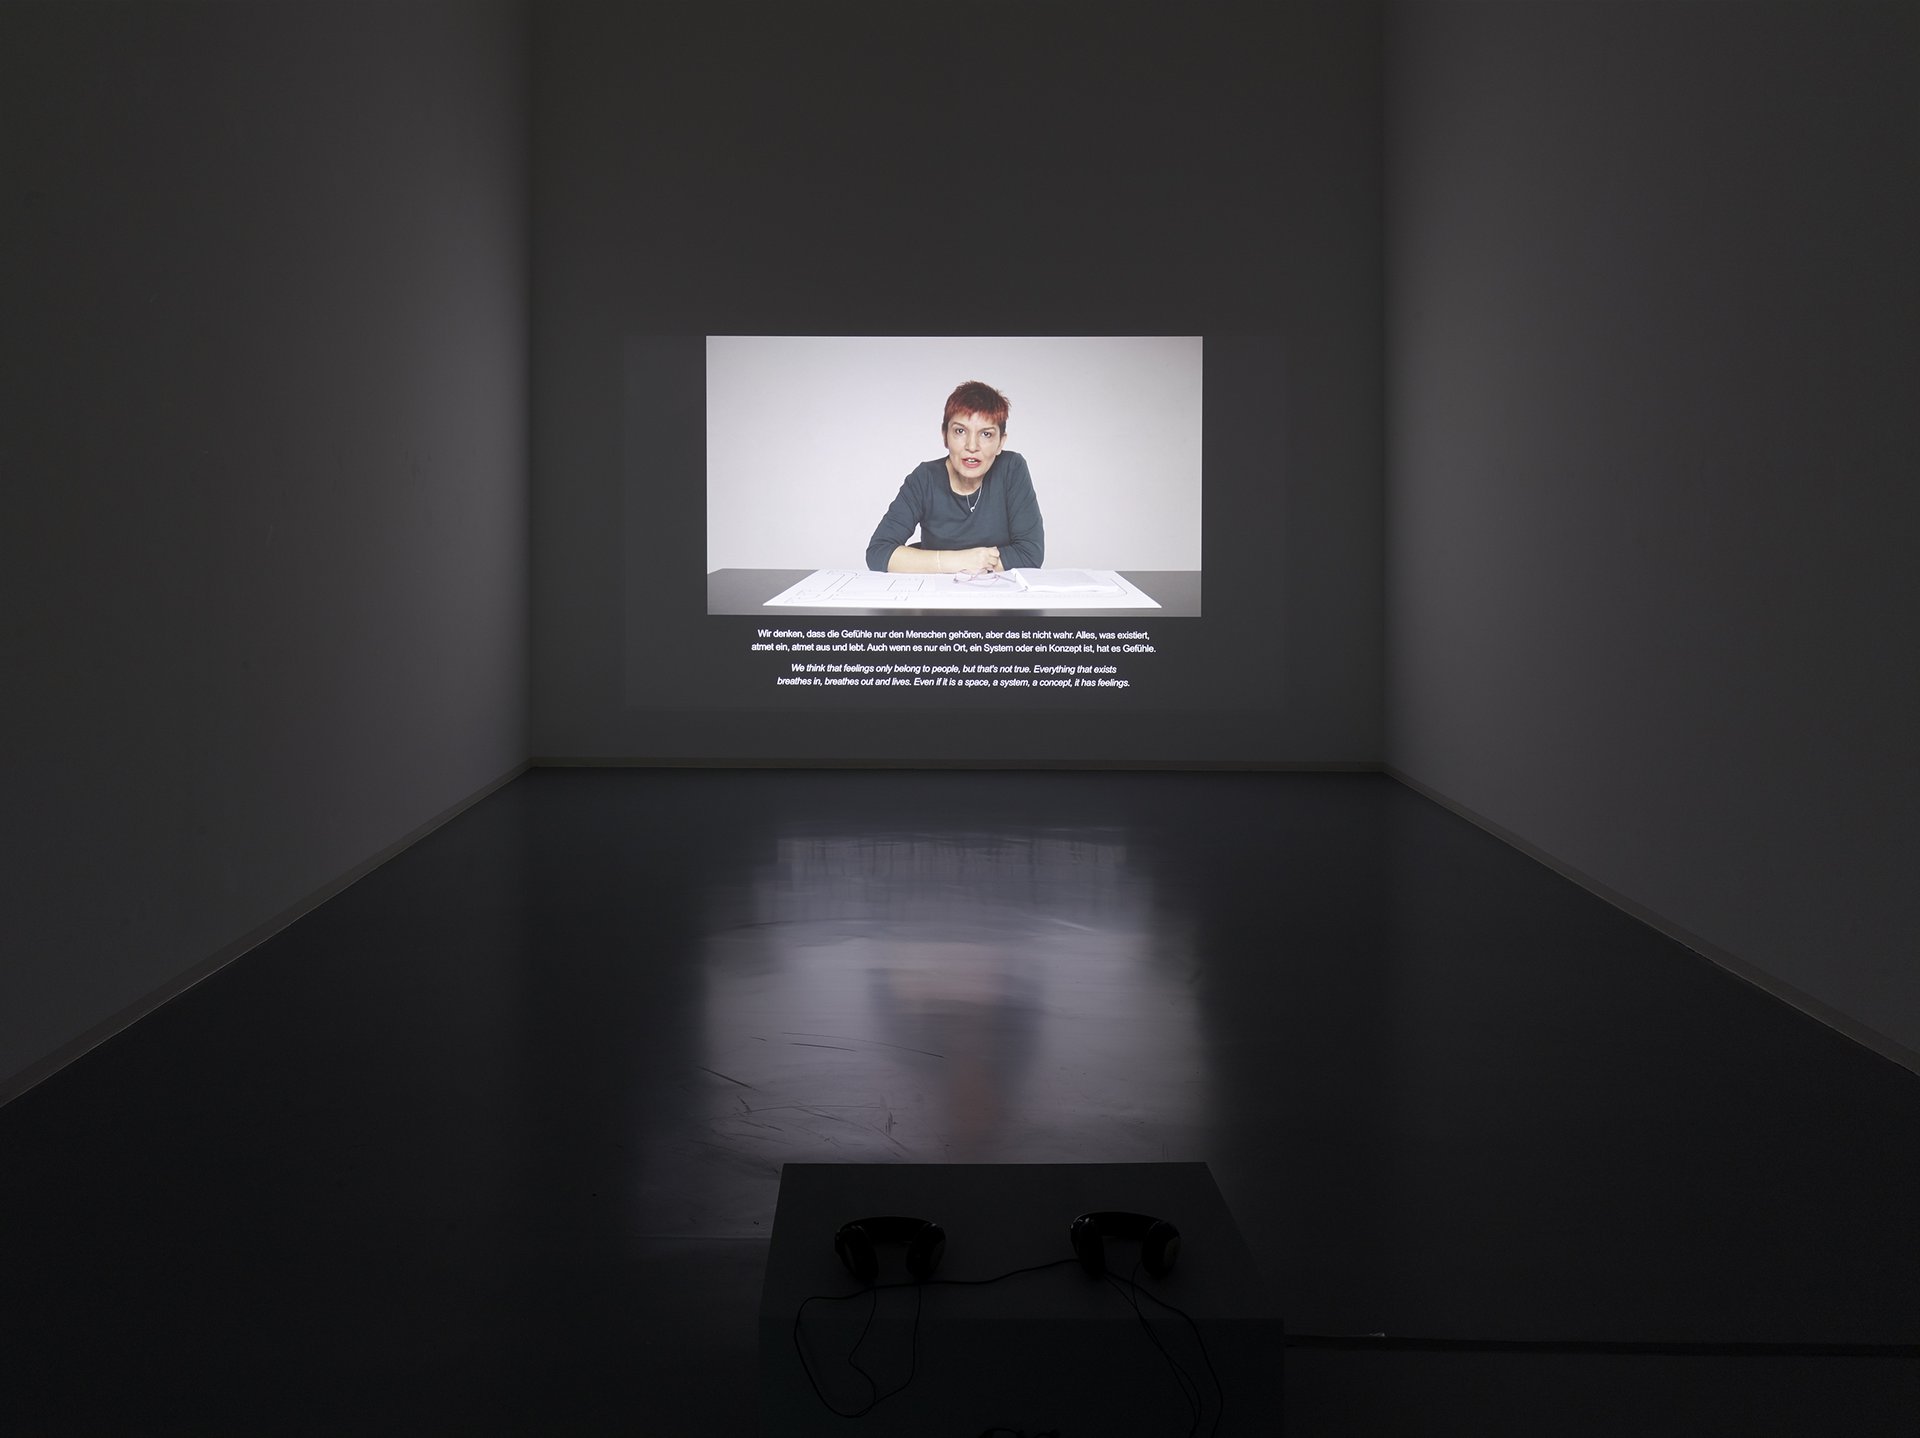 Banu Cennetoğlu and and Yasemin Özcan, What is it that you are worried about?/Worüber bist Du besorgt?, installation view, 2015, Bonner Kunstverein, Courtesy of the artist and Rodeo, London. Photo: Simon Vogel